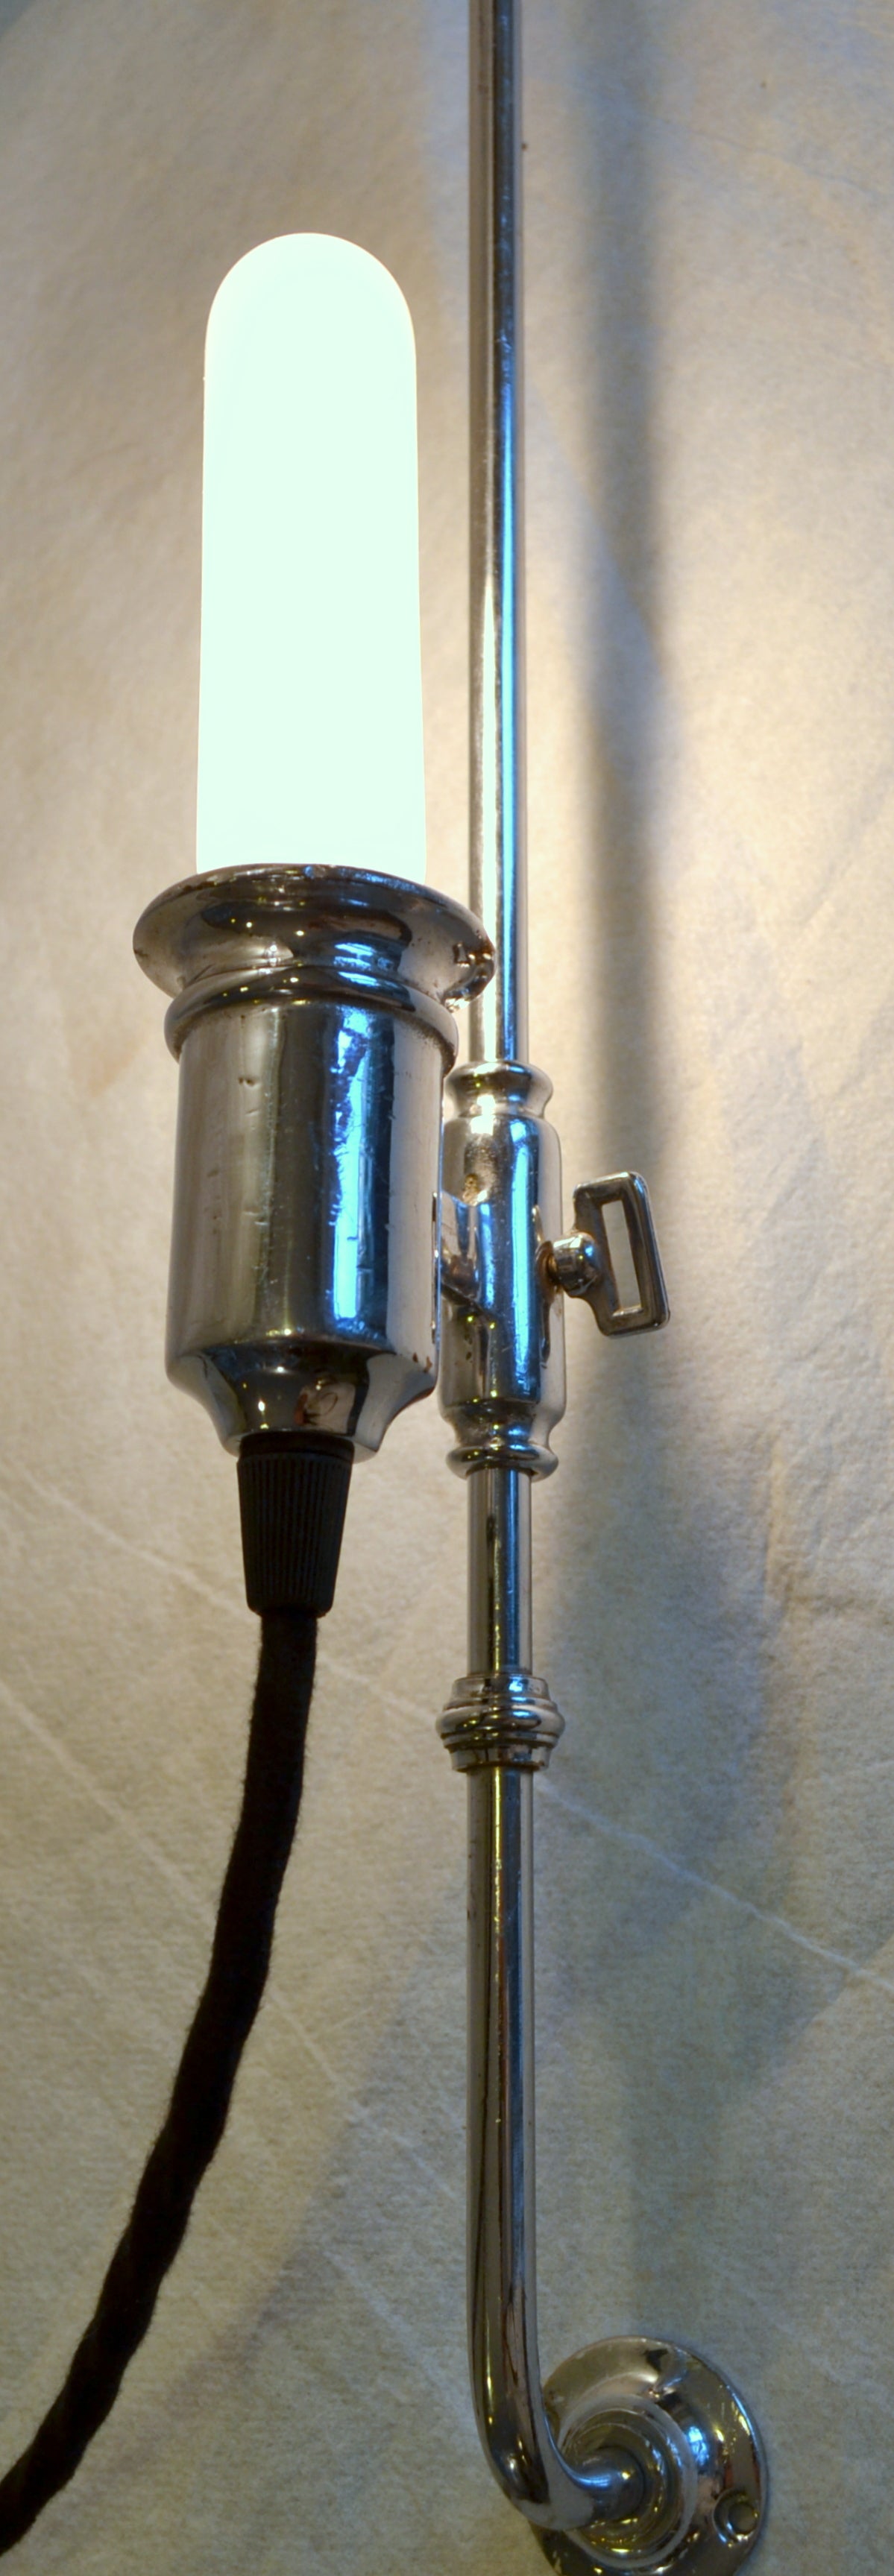 Machine-Made Arizona Biltmore Chrome-Plated Adjustable Sconces from 1929 Rare For Sale